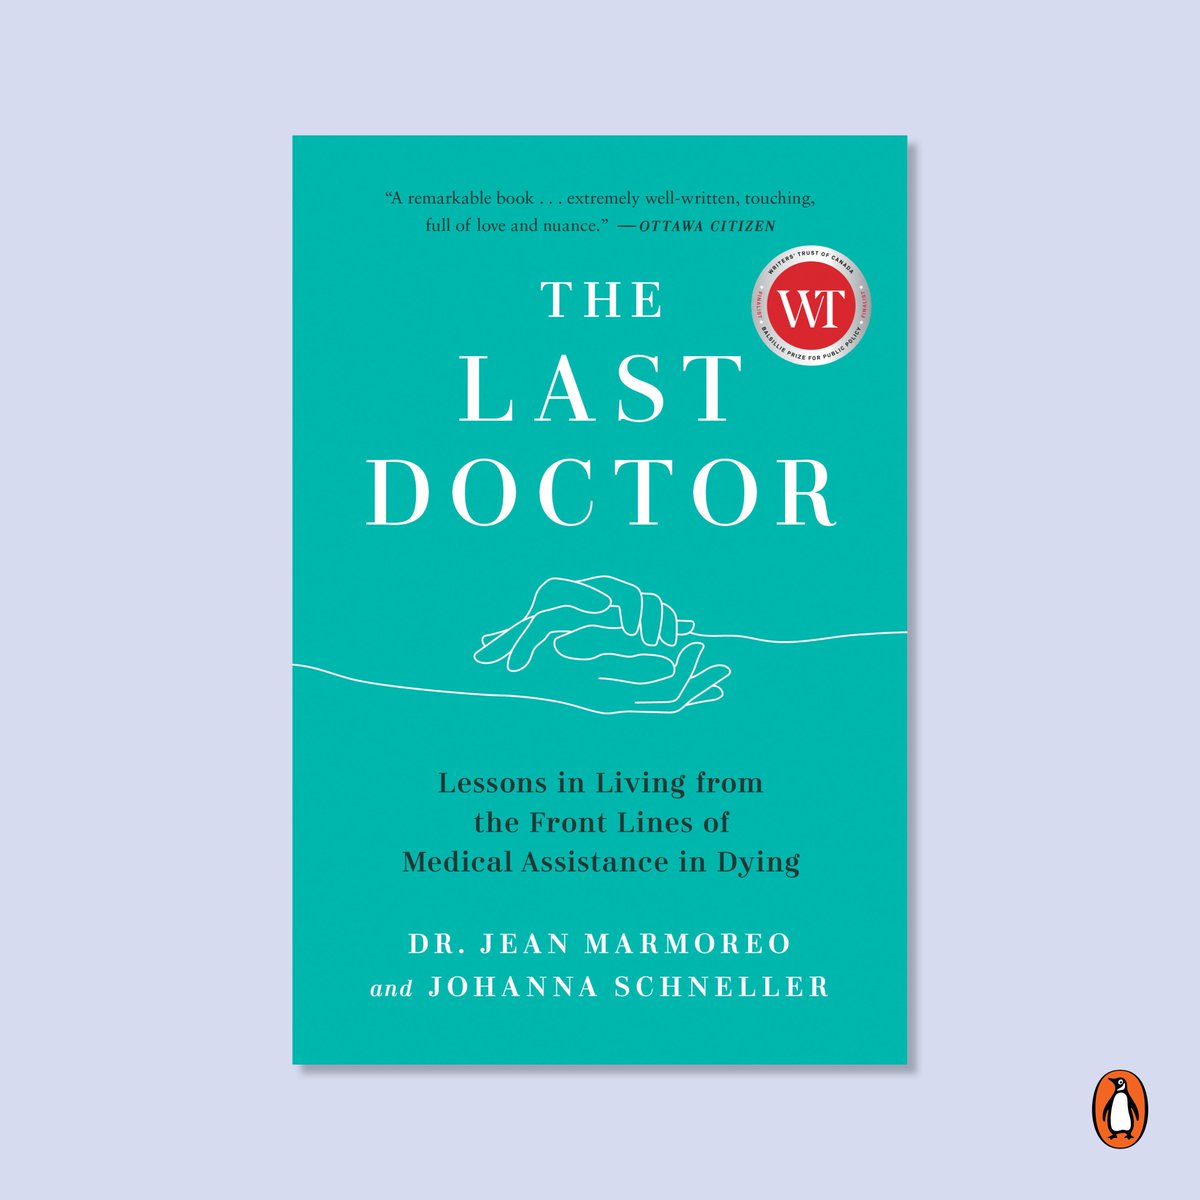 Shortlisted for the 2022 Writers’ Trust Balsillie Prize for Public Policy, THE LAST DOCTOR is an urgent exploration of Medical Assistance in Dying (MAiD) in Canada from one of its first practitioners. Out now in paperback, and with updated material.